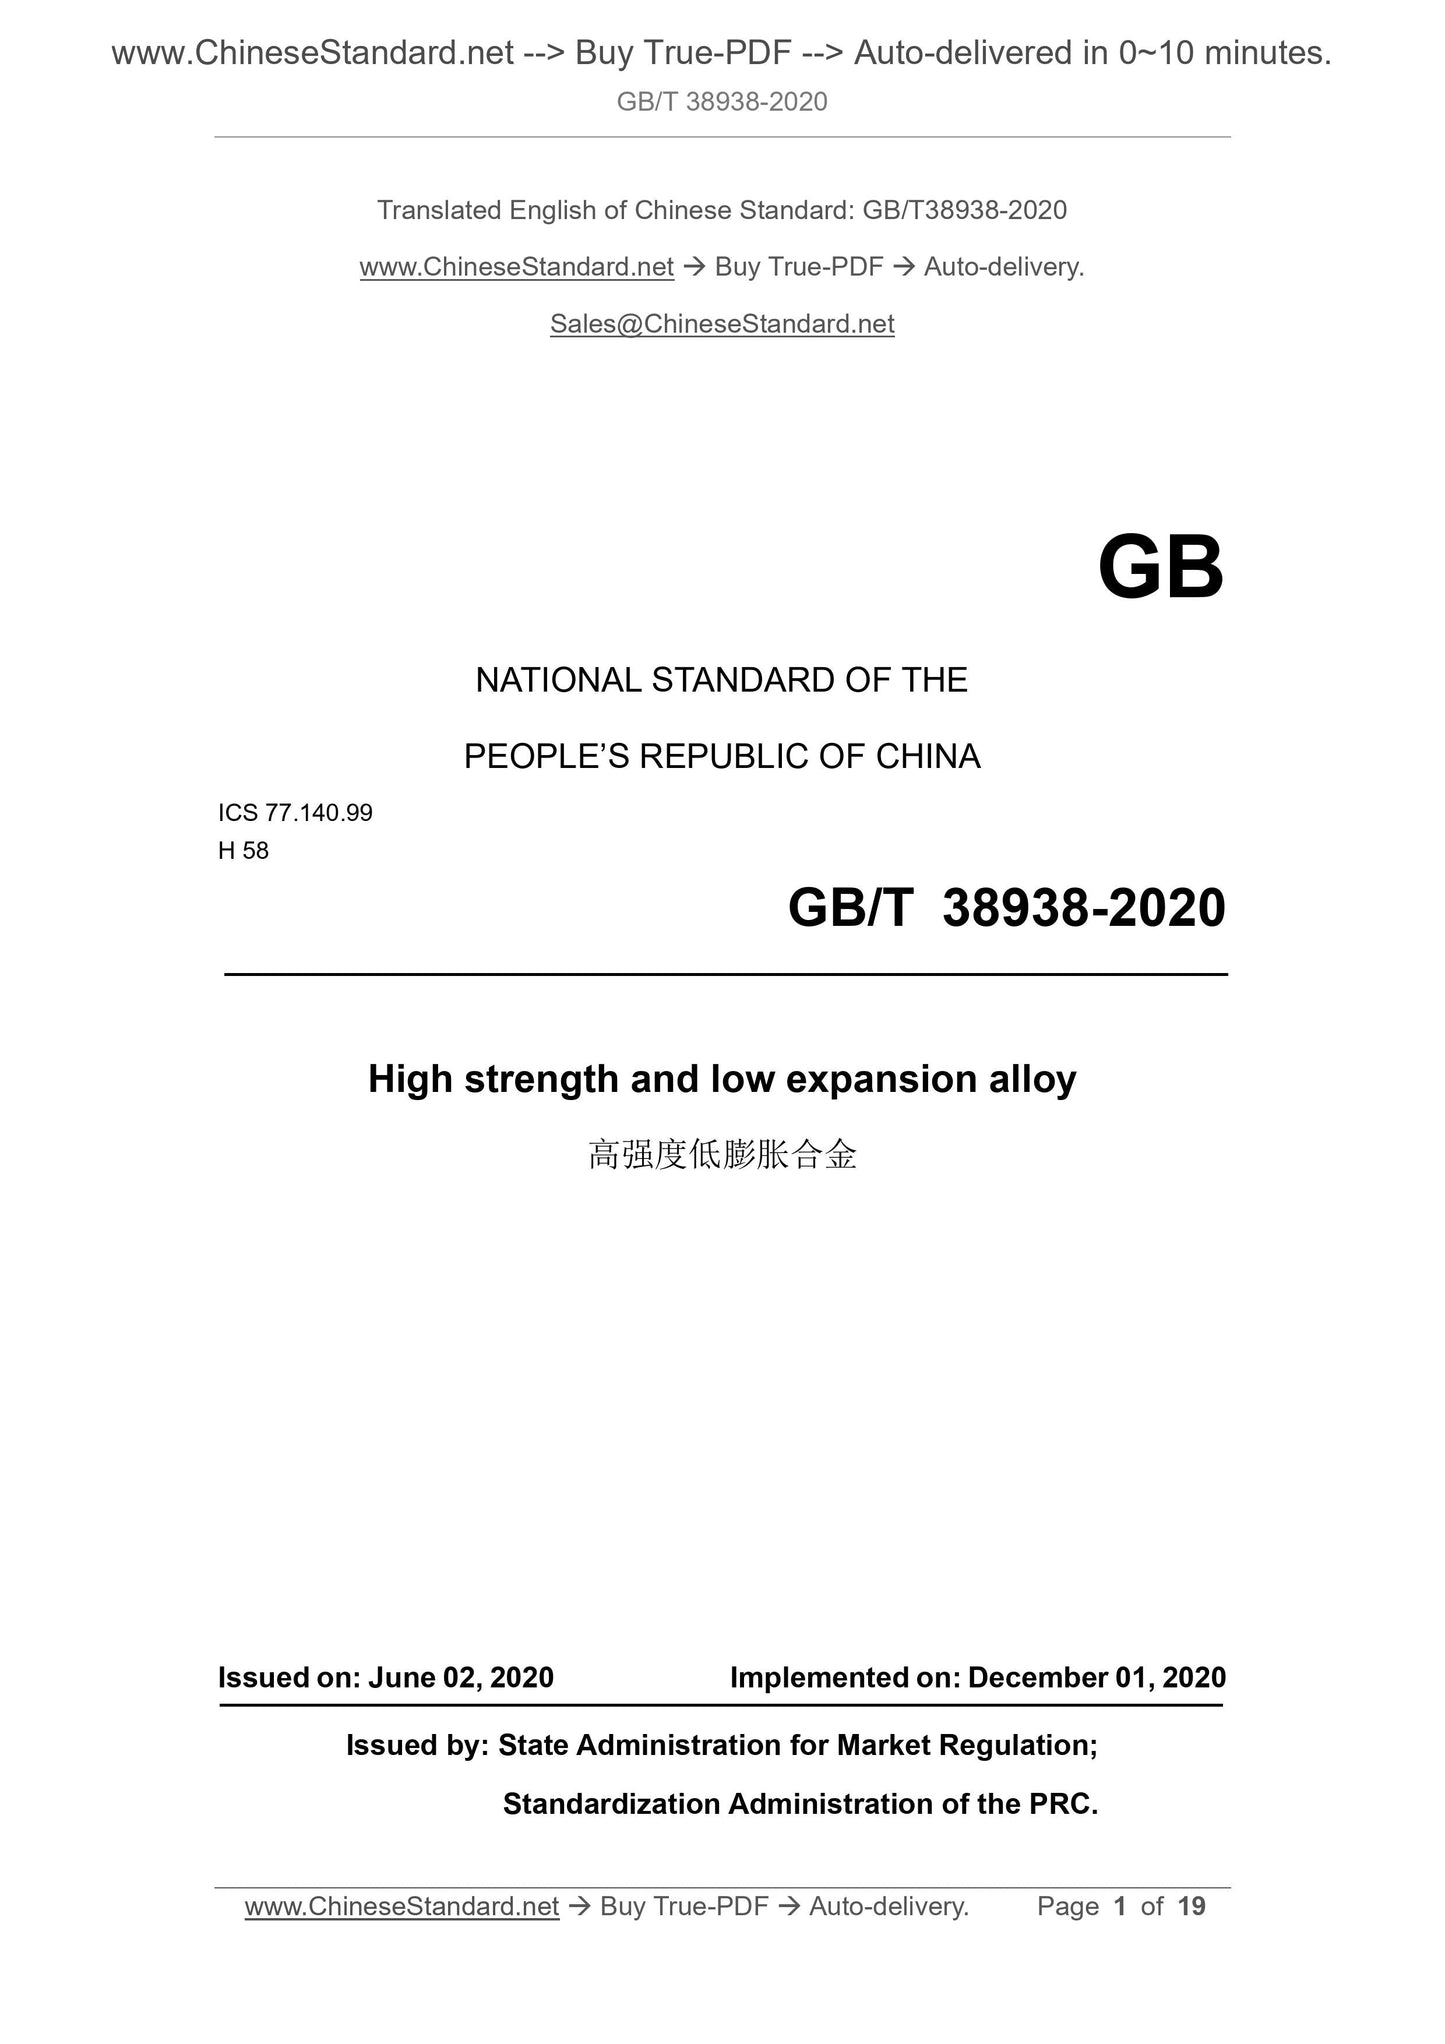 GB/T 38938-2020 Page 1